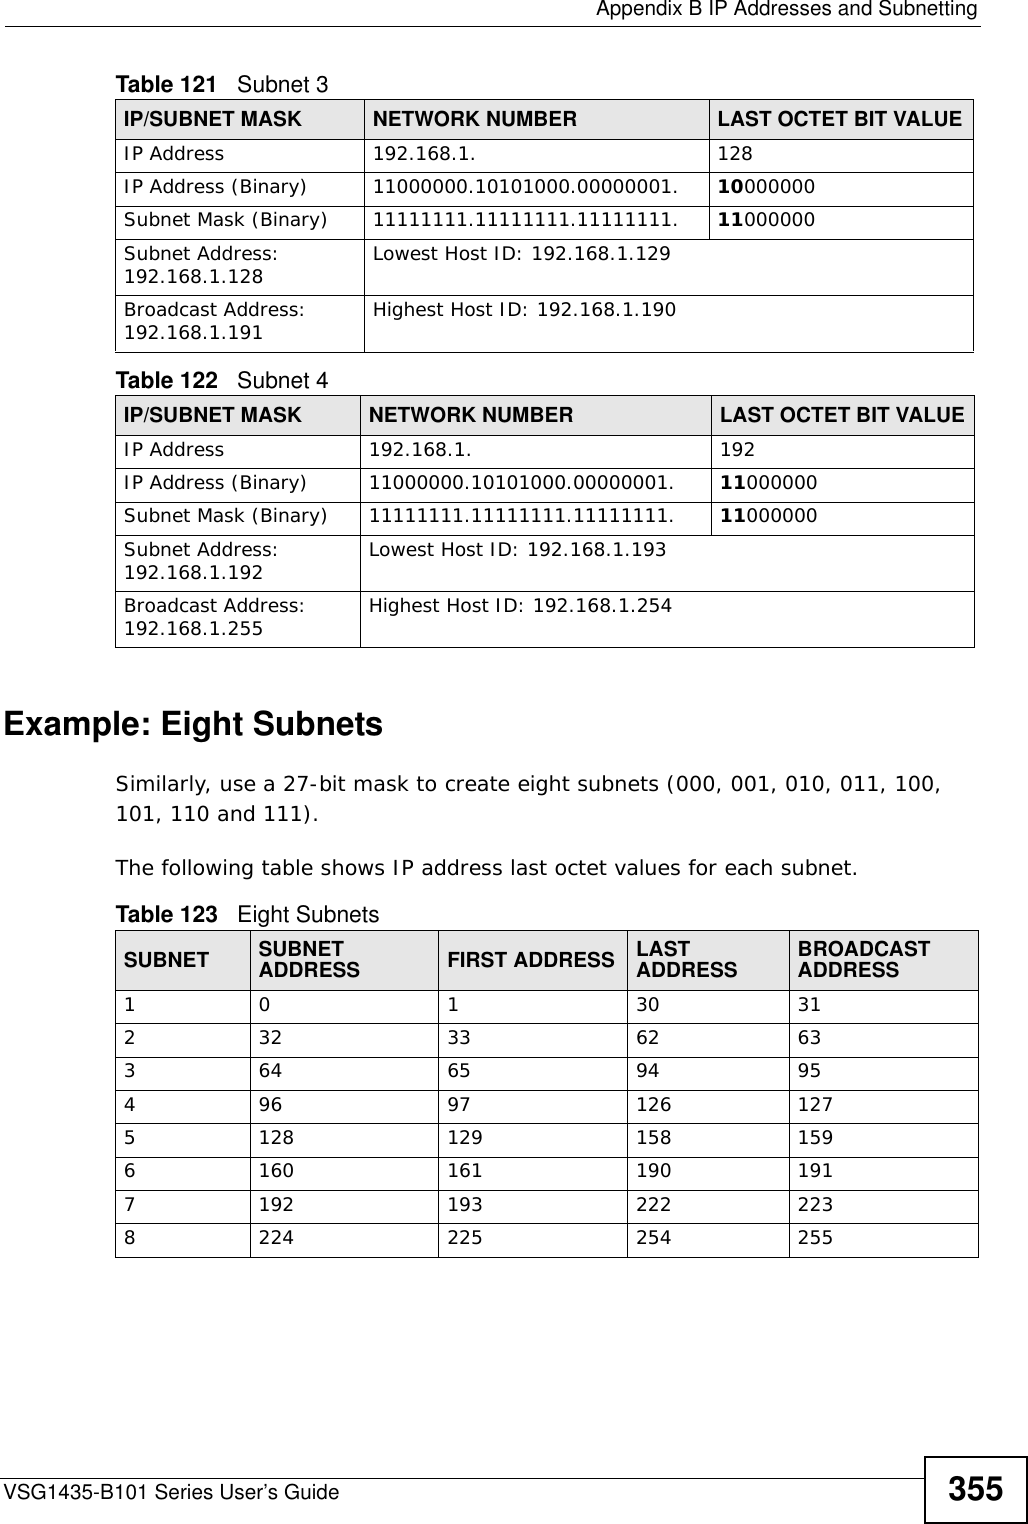  Appendix B IP Addresses and SubnettingVSG1435-B101 Series User’s Guide 355Example: Eight SubnetsSimilarly, use a 27-bit mask to create eight subnets (000, 001, 010, 011, 100, 101, 110 and 111). The following table shows IP address last octet values for each subnet.Table 121   Subnet 3IP/SUBNET MASK NETWORK NUMBER LAST OCTET BIT VALUEIP Address 192.168.1. 128IP Address (Binary) 11000000.10101000.00000001. 10000000Subnet Mask (Binary) 11111111.11111111.11111111. 11000000Subnet Address: 192.168.1.128 Lowest Host ID: 192.168.1.129Broadcast Address: 192.168.1.191 Highest Host ID: 192.168.1.190Table 122   Subnet 4IP/SUBNET MASK NETWORK NUMBER LAST OCTET BIT VALUEIP Address 192.168.1. 192IP Address (Binary) 11000000.10101000.00000001. 11000000Subnet Mask (Binary) 11111111.11111111.11111111. 11000000Subnet Address: 192.168.1.192 Lowest Host ID: 192.168.1.193Broadcast Address: 192.168.1.255 Highest Host ID: 192.168.1.254Table 123   Eight SubnetsSUBNET SUBNET ADDRESS FIRST ADDRESS LAST ADDRESS BROADCAST ADDRESS1 0 1 30 31232 33 62 63364 65 94 95496 97 126 1275128 129 158 1596160 161 190 1917192 193 222 2238224 225 254 255